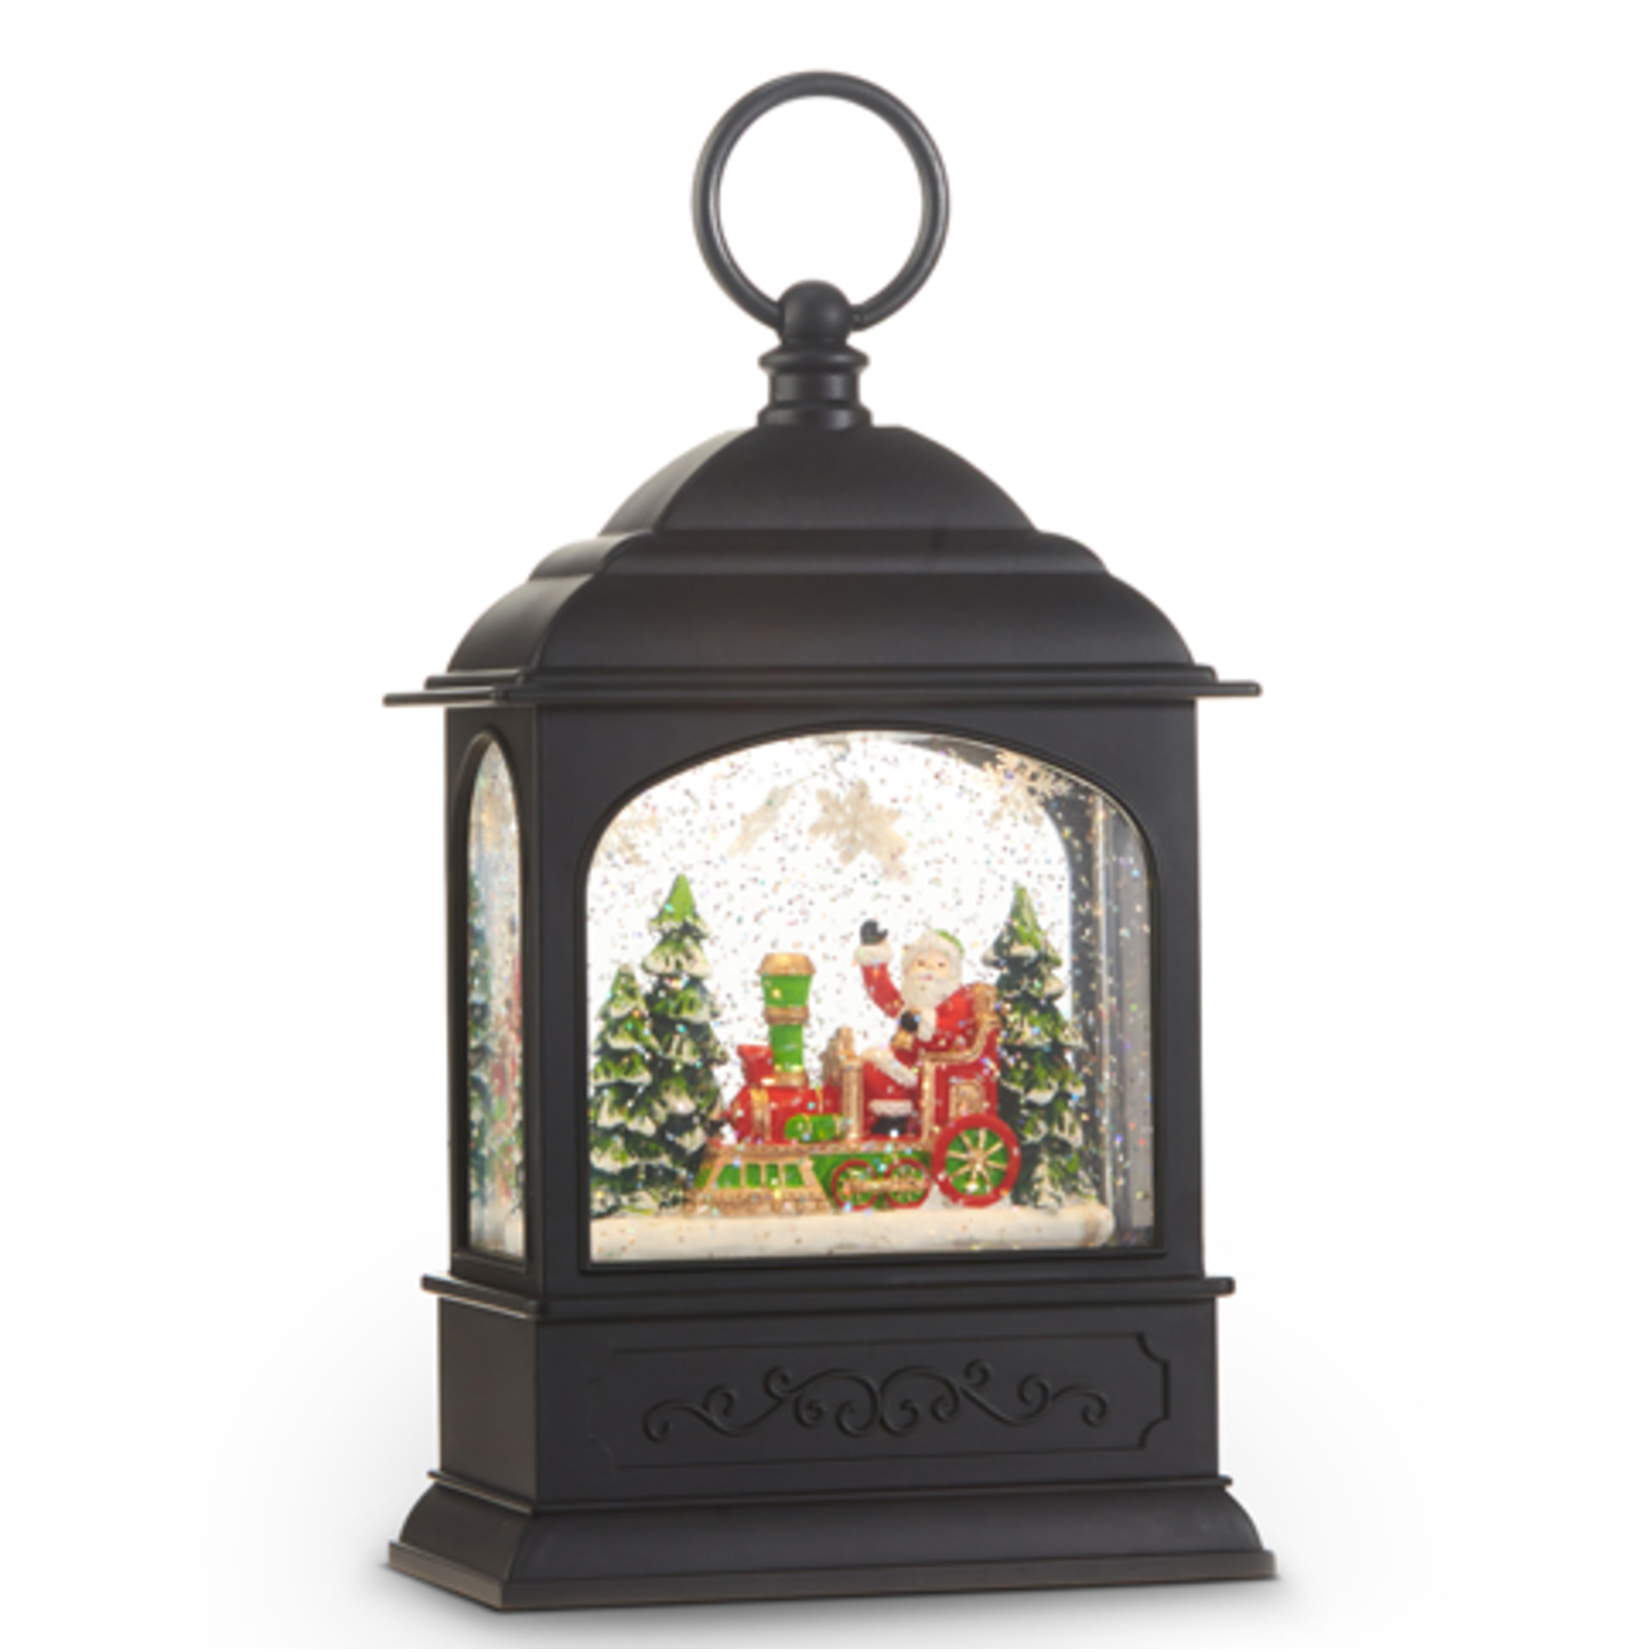 8.5" Santa in Train Animated Musical Lighted Water Lantern